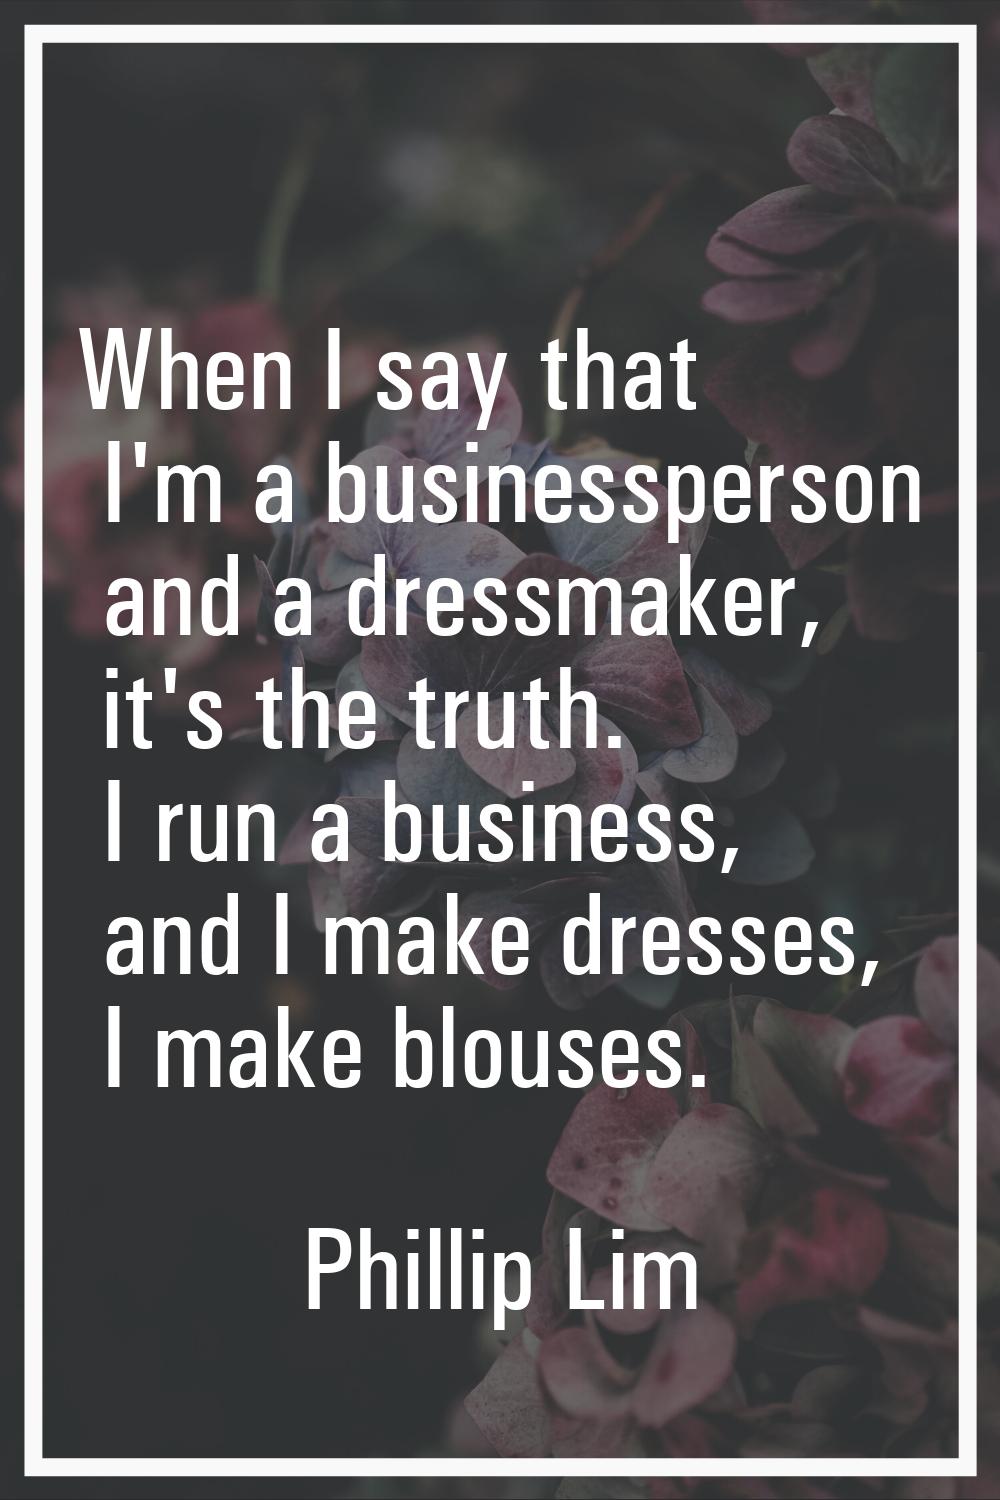 When I say that I'm a businessperson and a dressmaker, it's the truth. I run a business, and I make